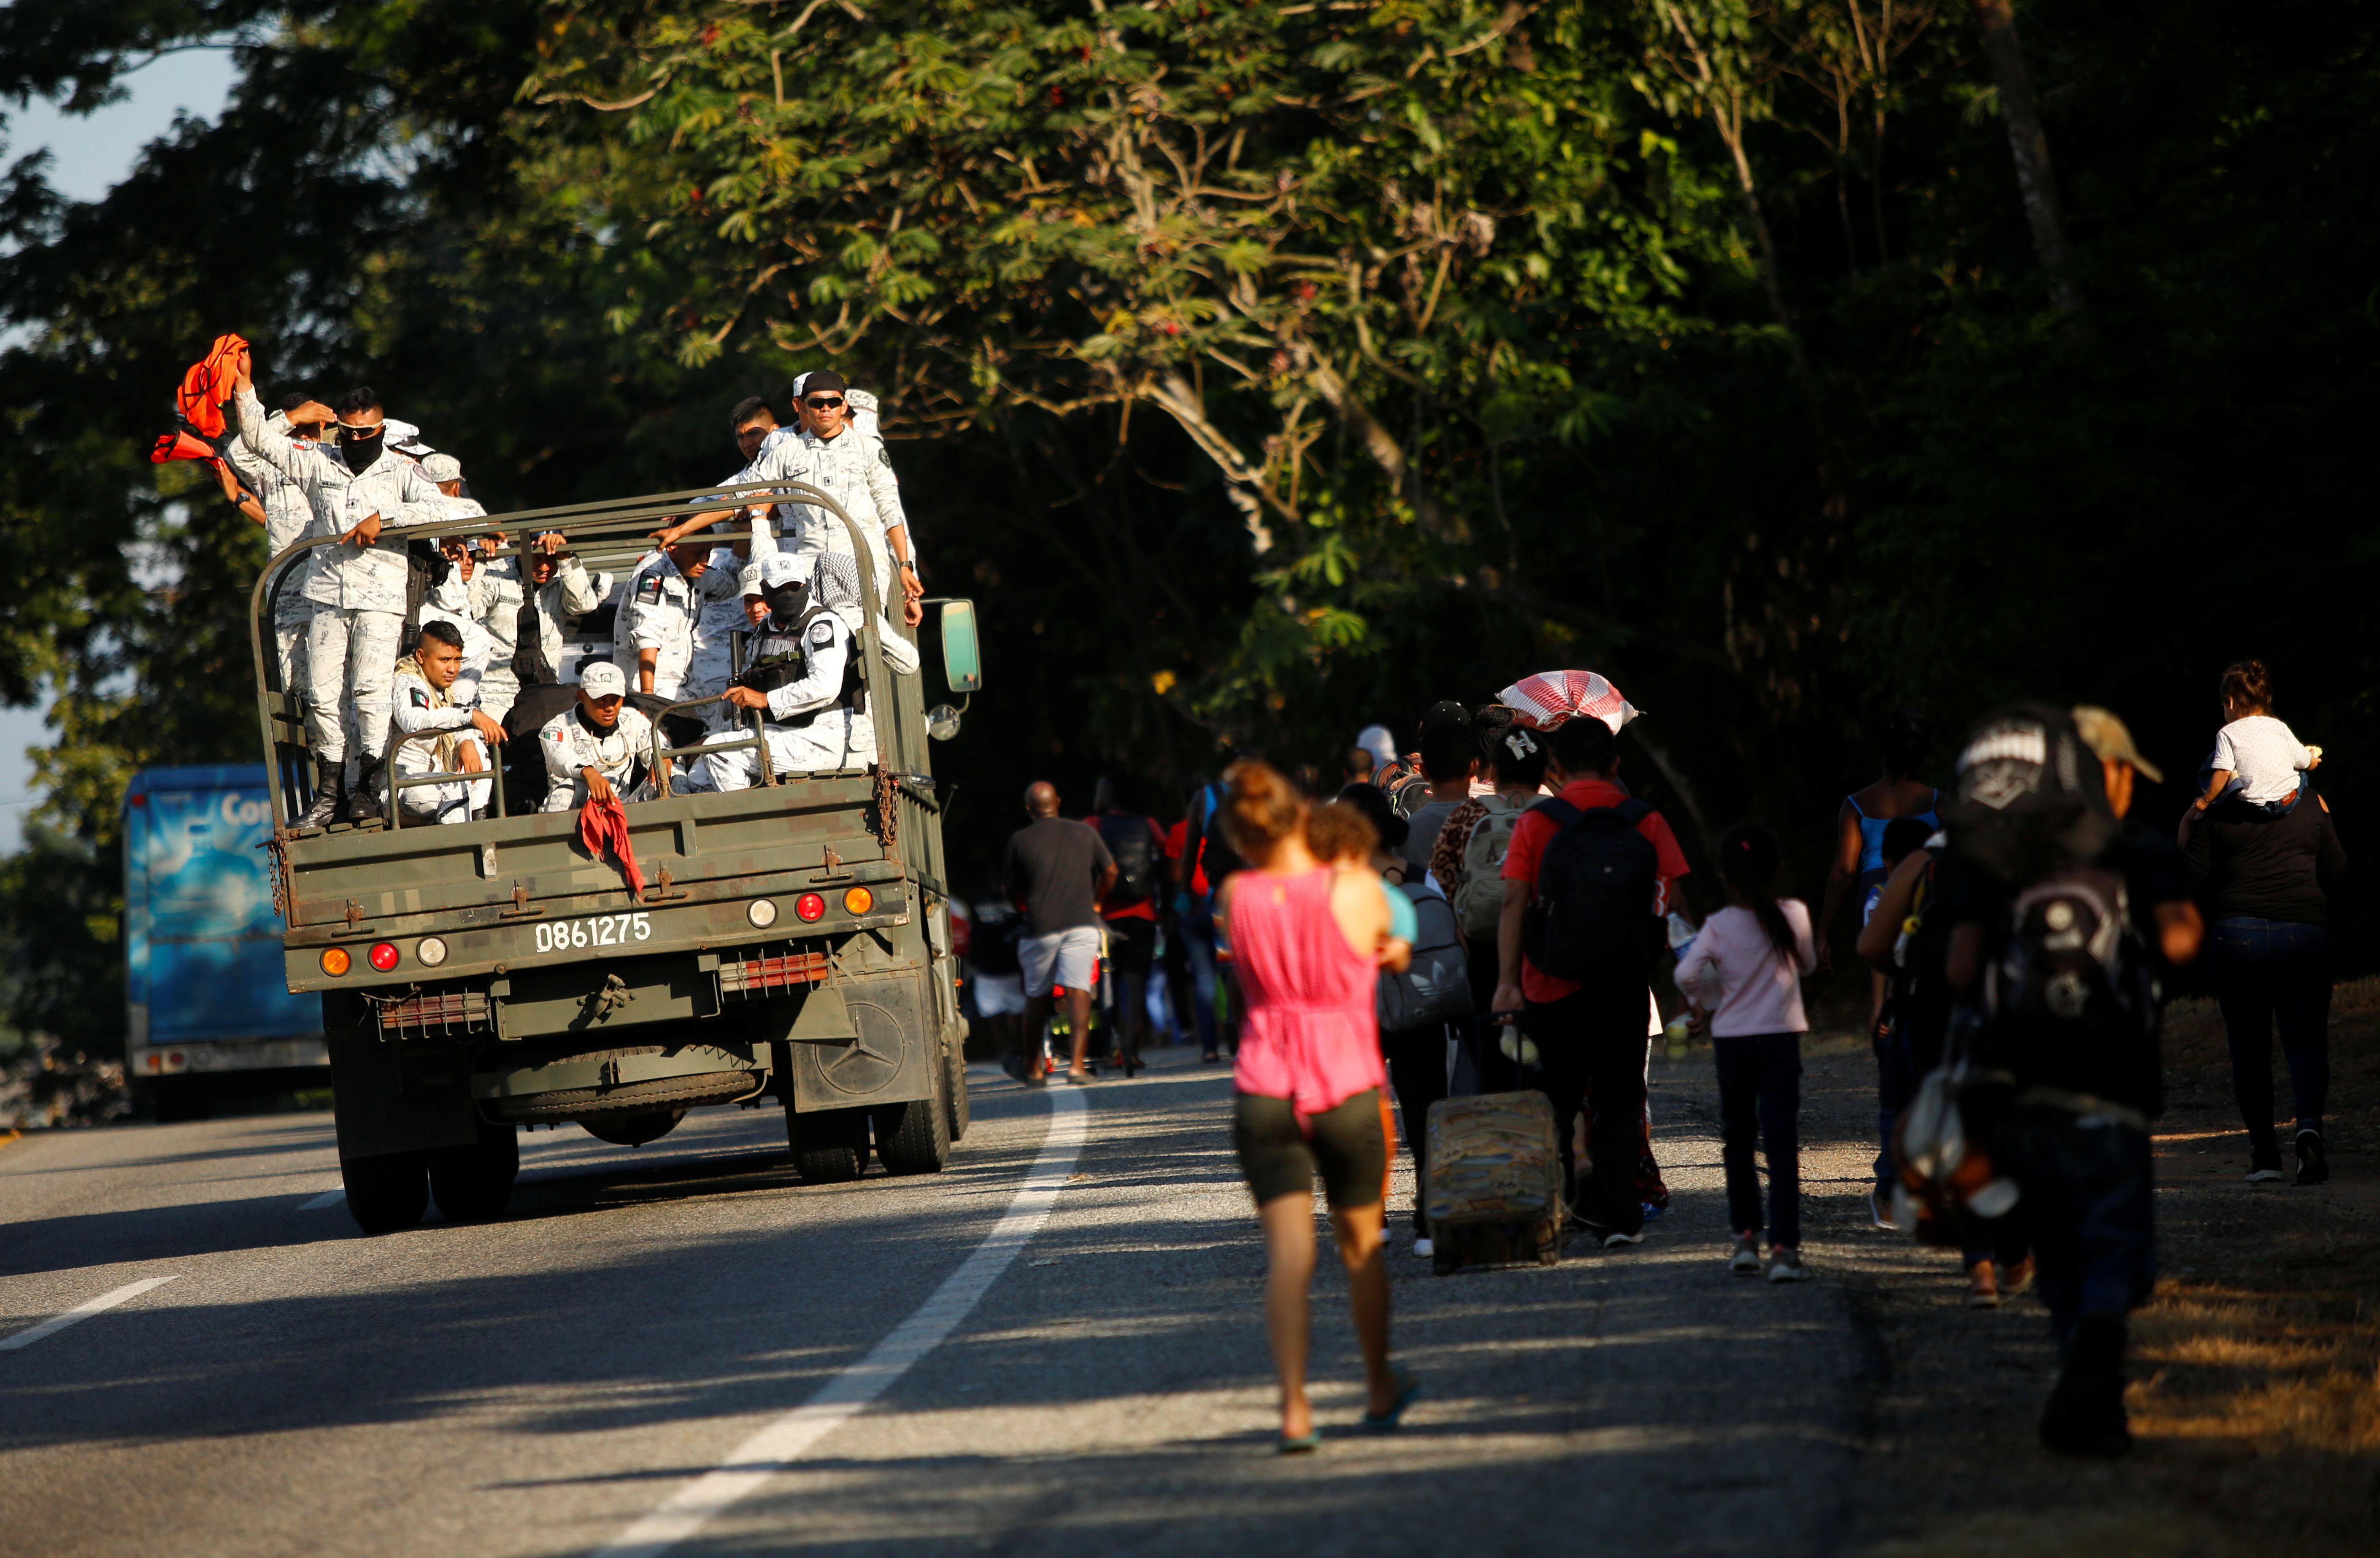 Migrants take part in a caravan heading to the U.S. border, near Tapachula